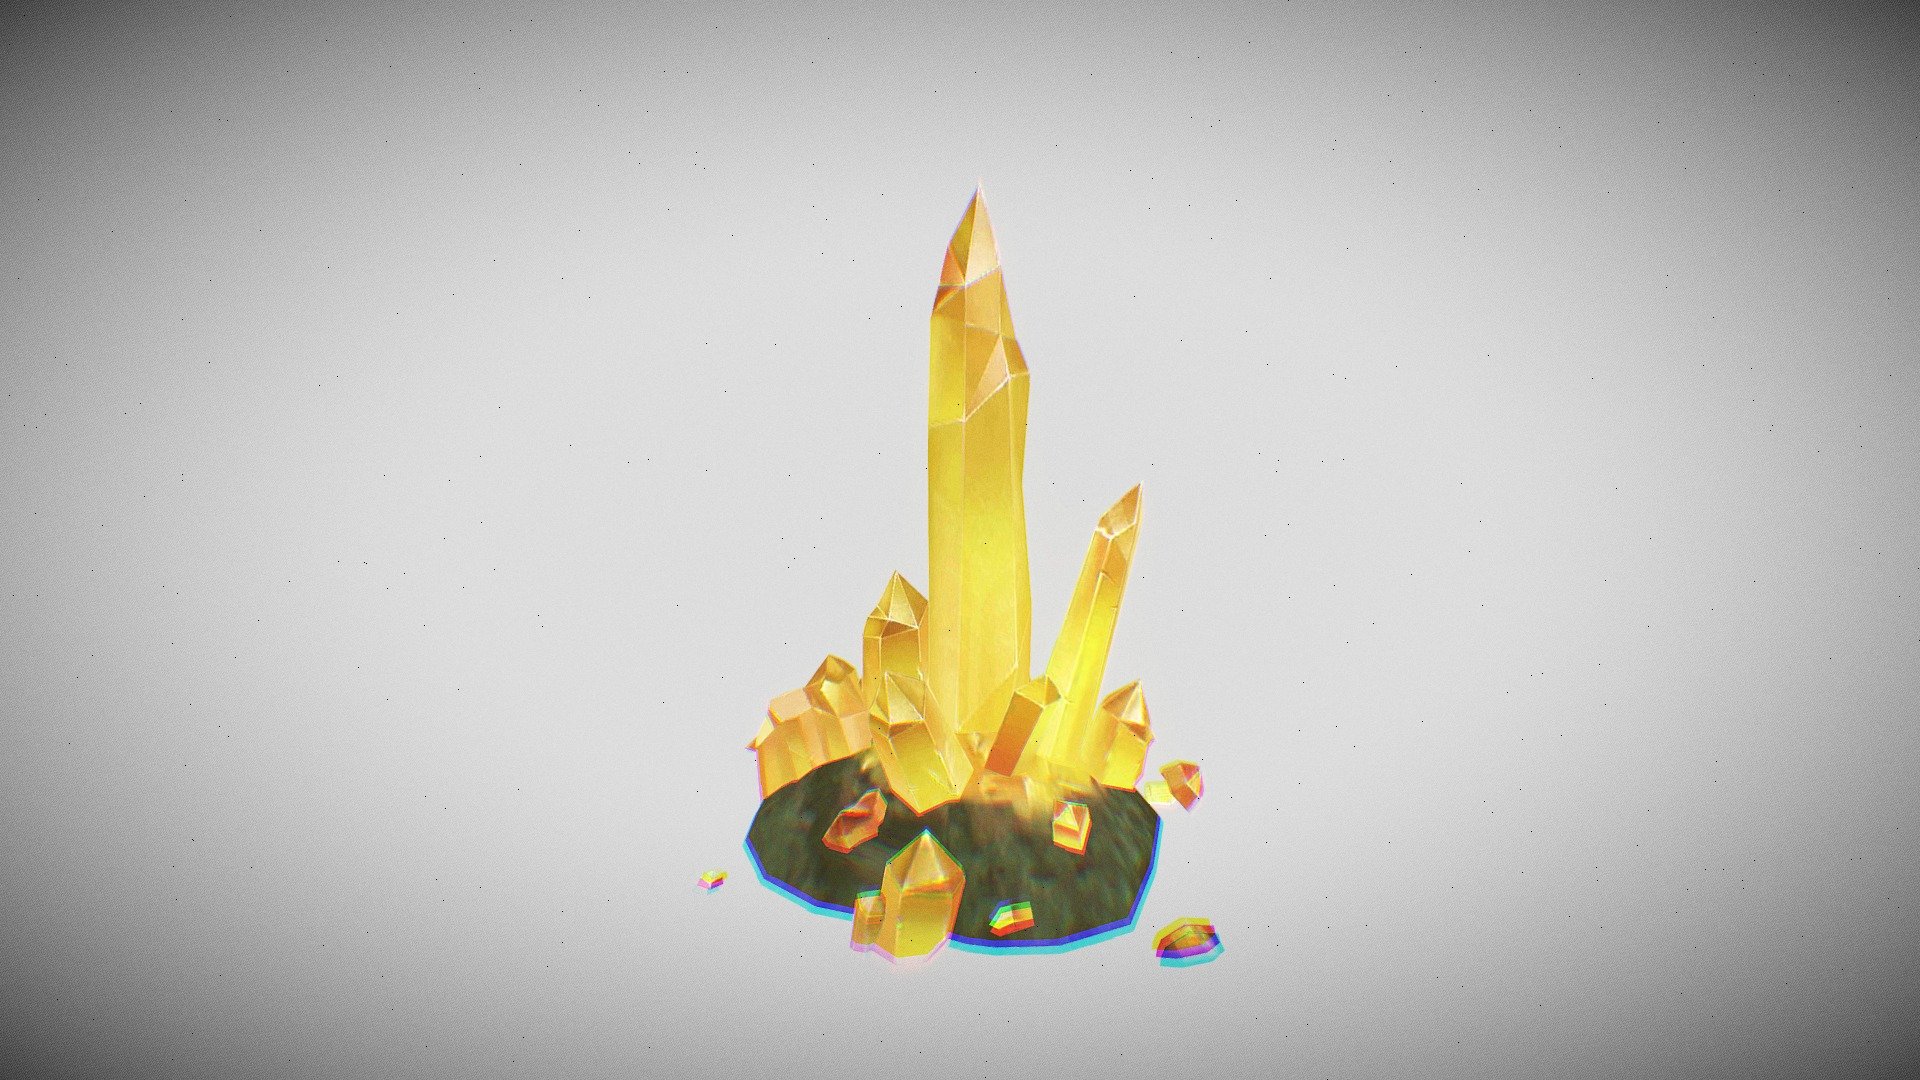 https://www.buymeacoffee.com/Khyoocumber - Lowpoly textured golden crystals - Download Free 3D model by Khyoocumber 3d model